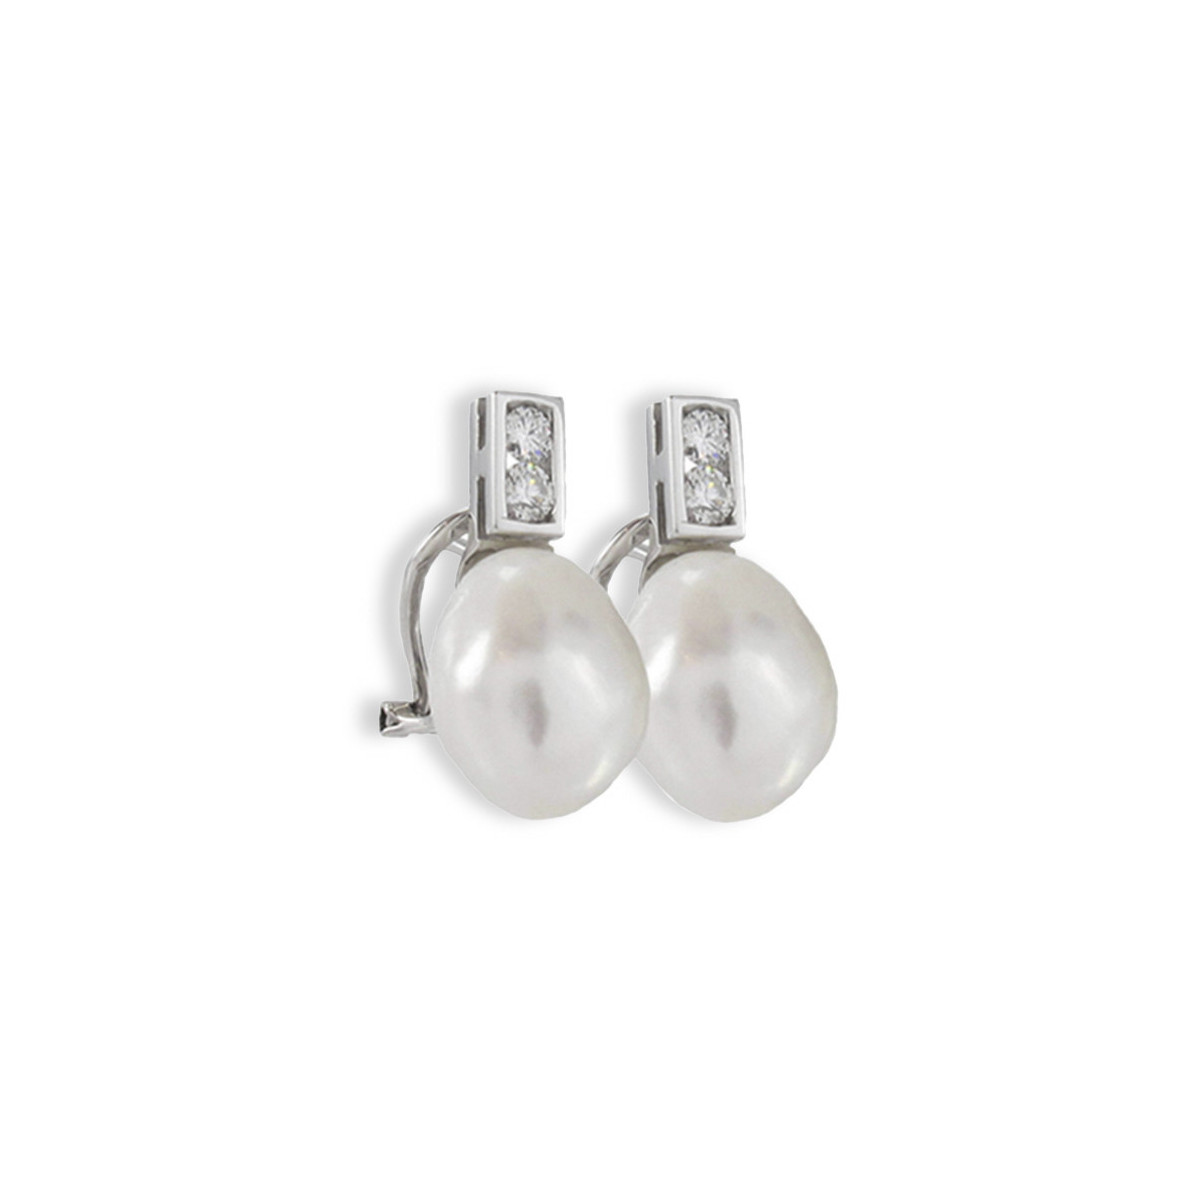 GOLD DIAMOND AND PEARL EARRING